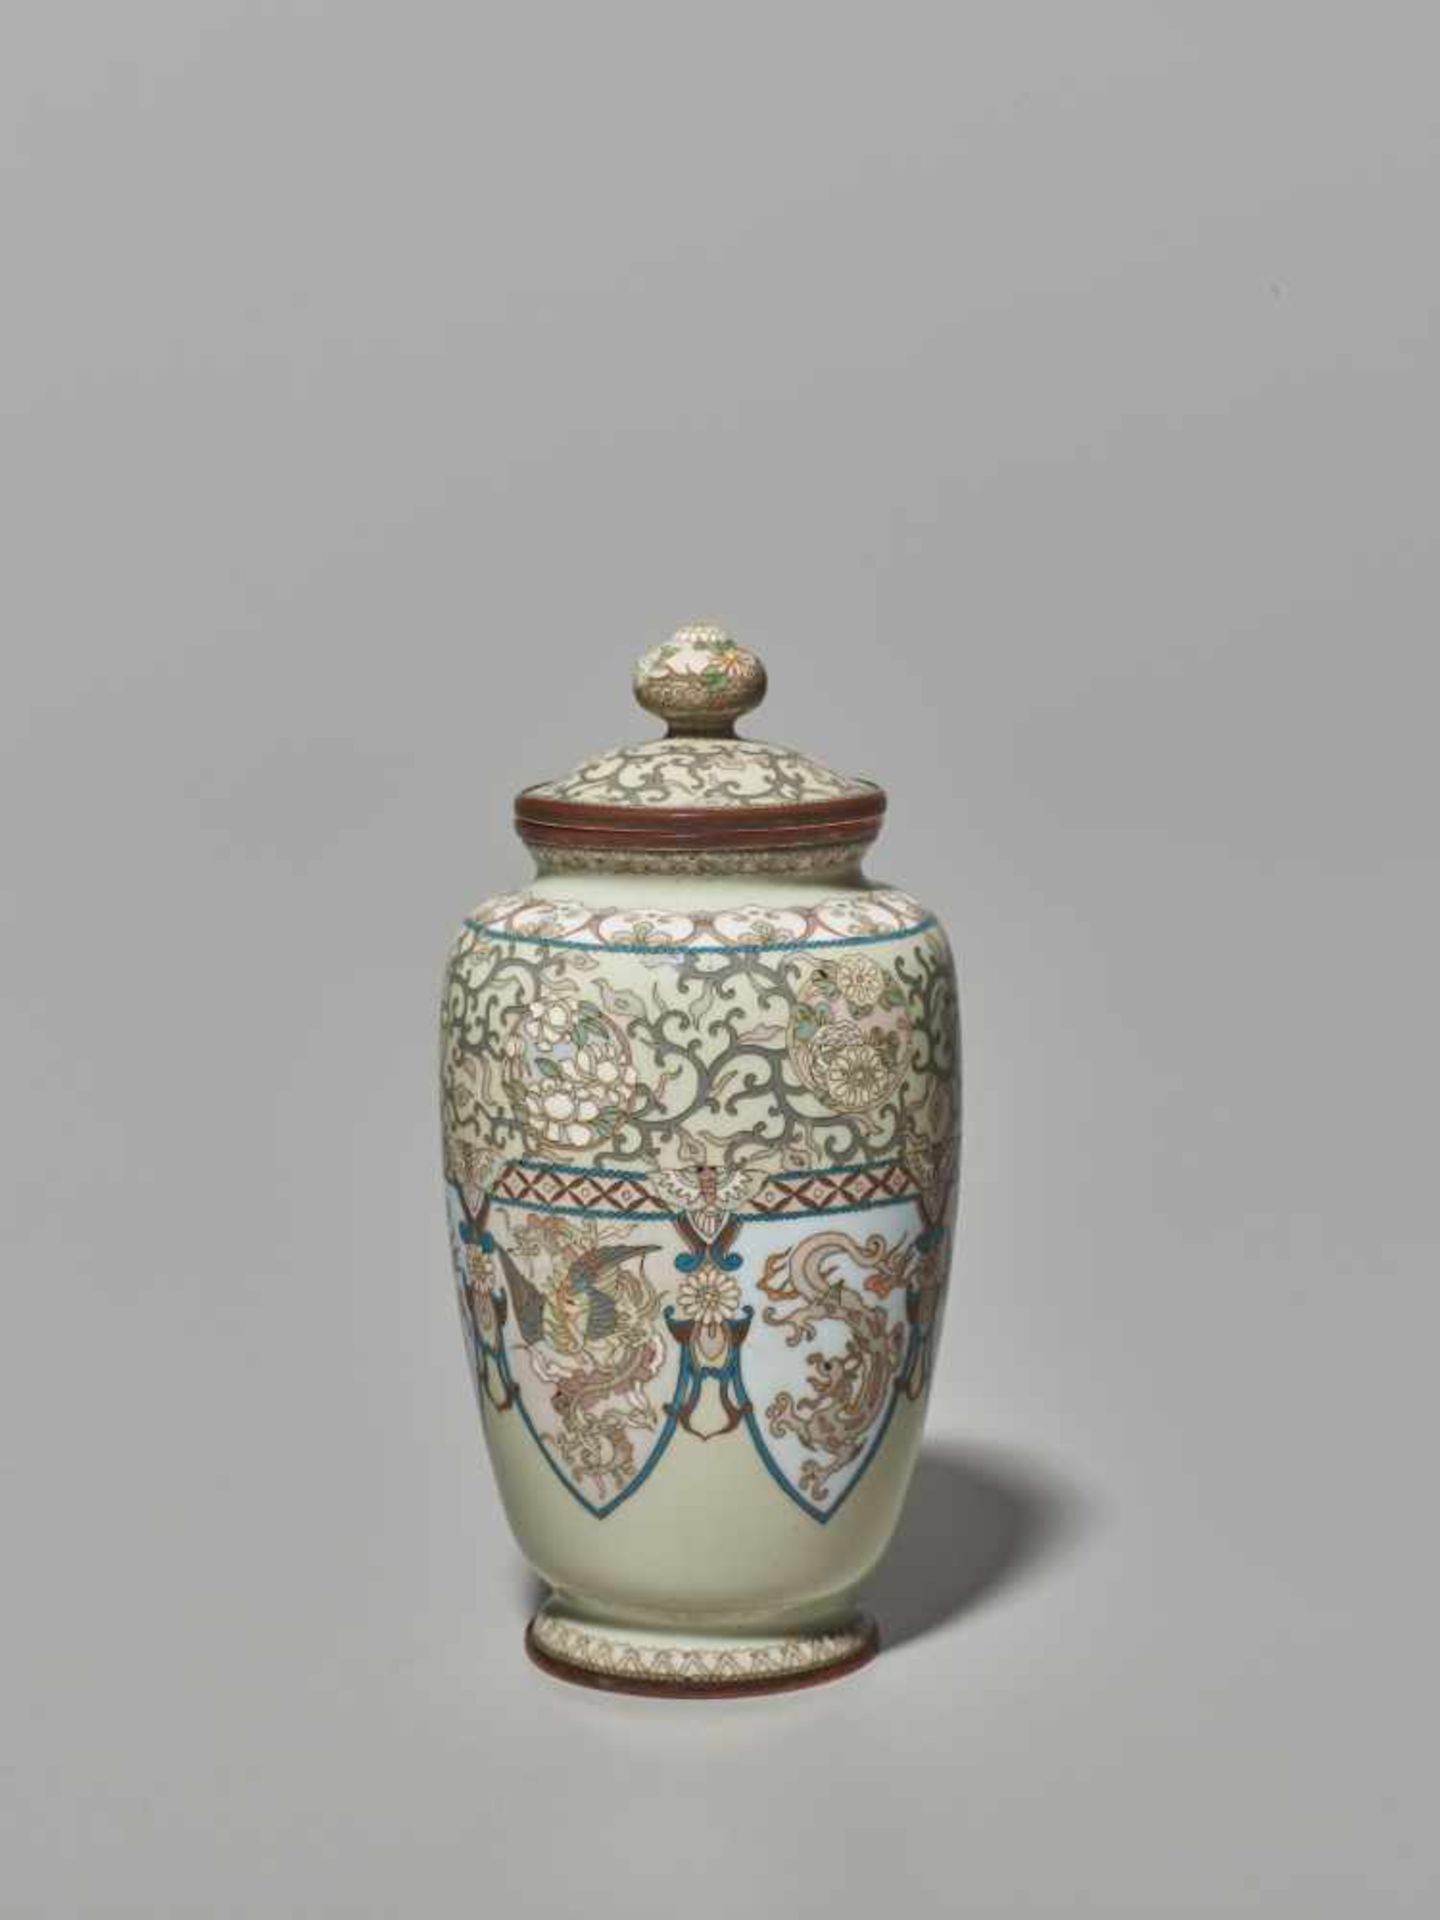 A JAPANESE CLOISONNÉ LIDDED VASE WITH A DESIGN OF PHOENIXES AND DRAGONSCloisonné with colored - Image 6 of 6